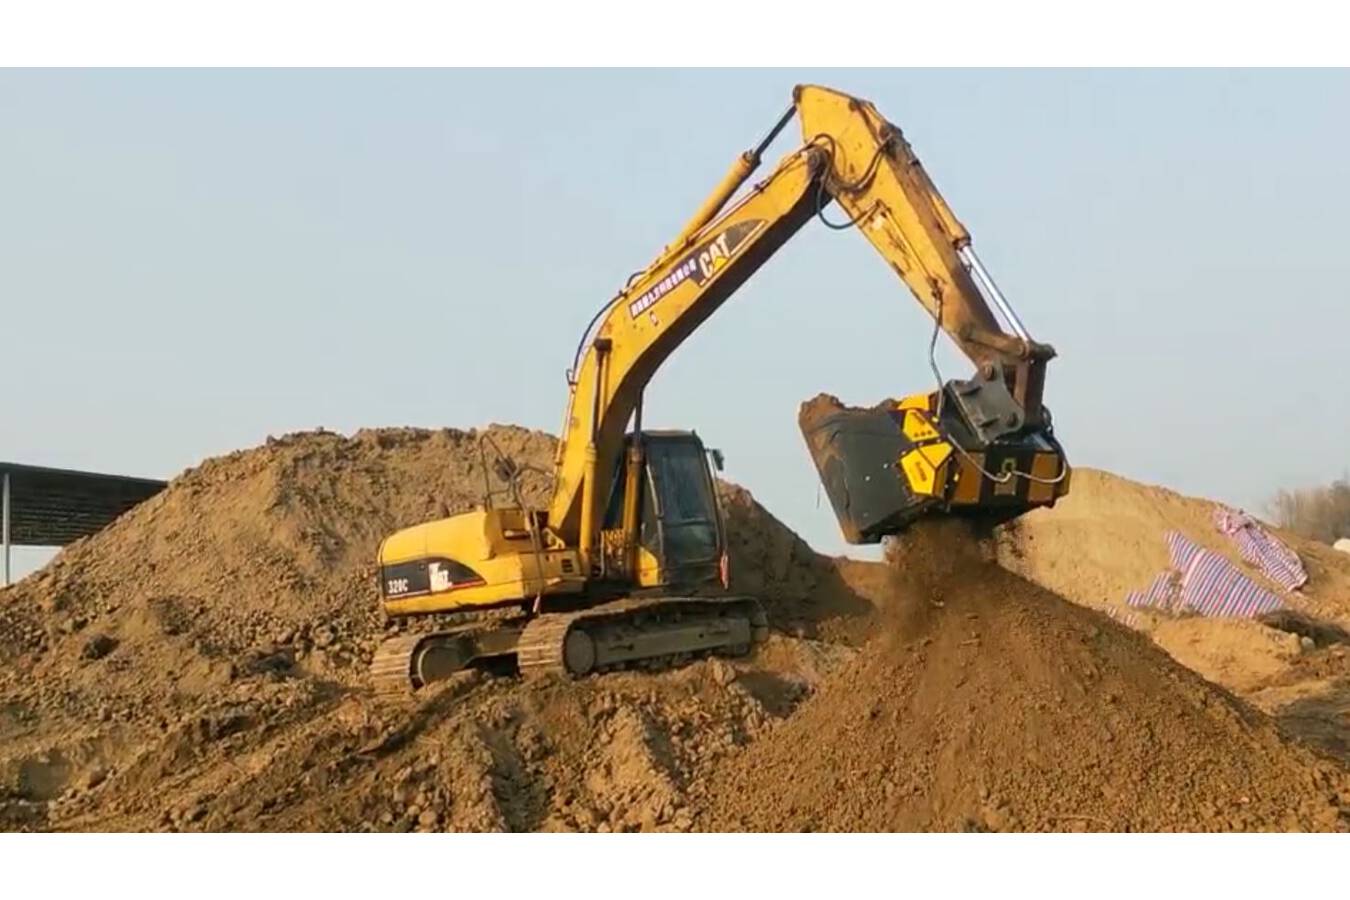 Soil, excavated rock, and sand,  how do you manage them on-site? The problem with excavated earth and rocks is, from an economic, regulatory, and an environmental perspective. However, there is a solution and is within reach. 